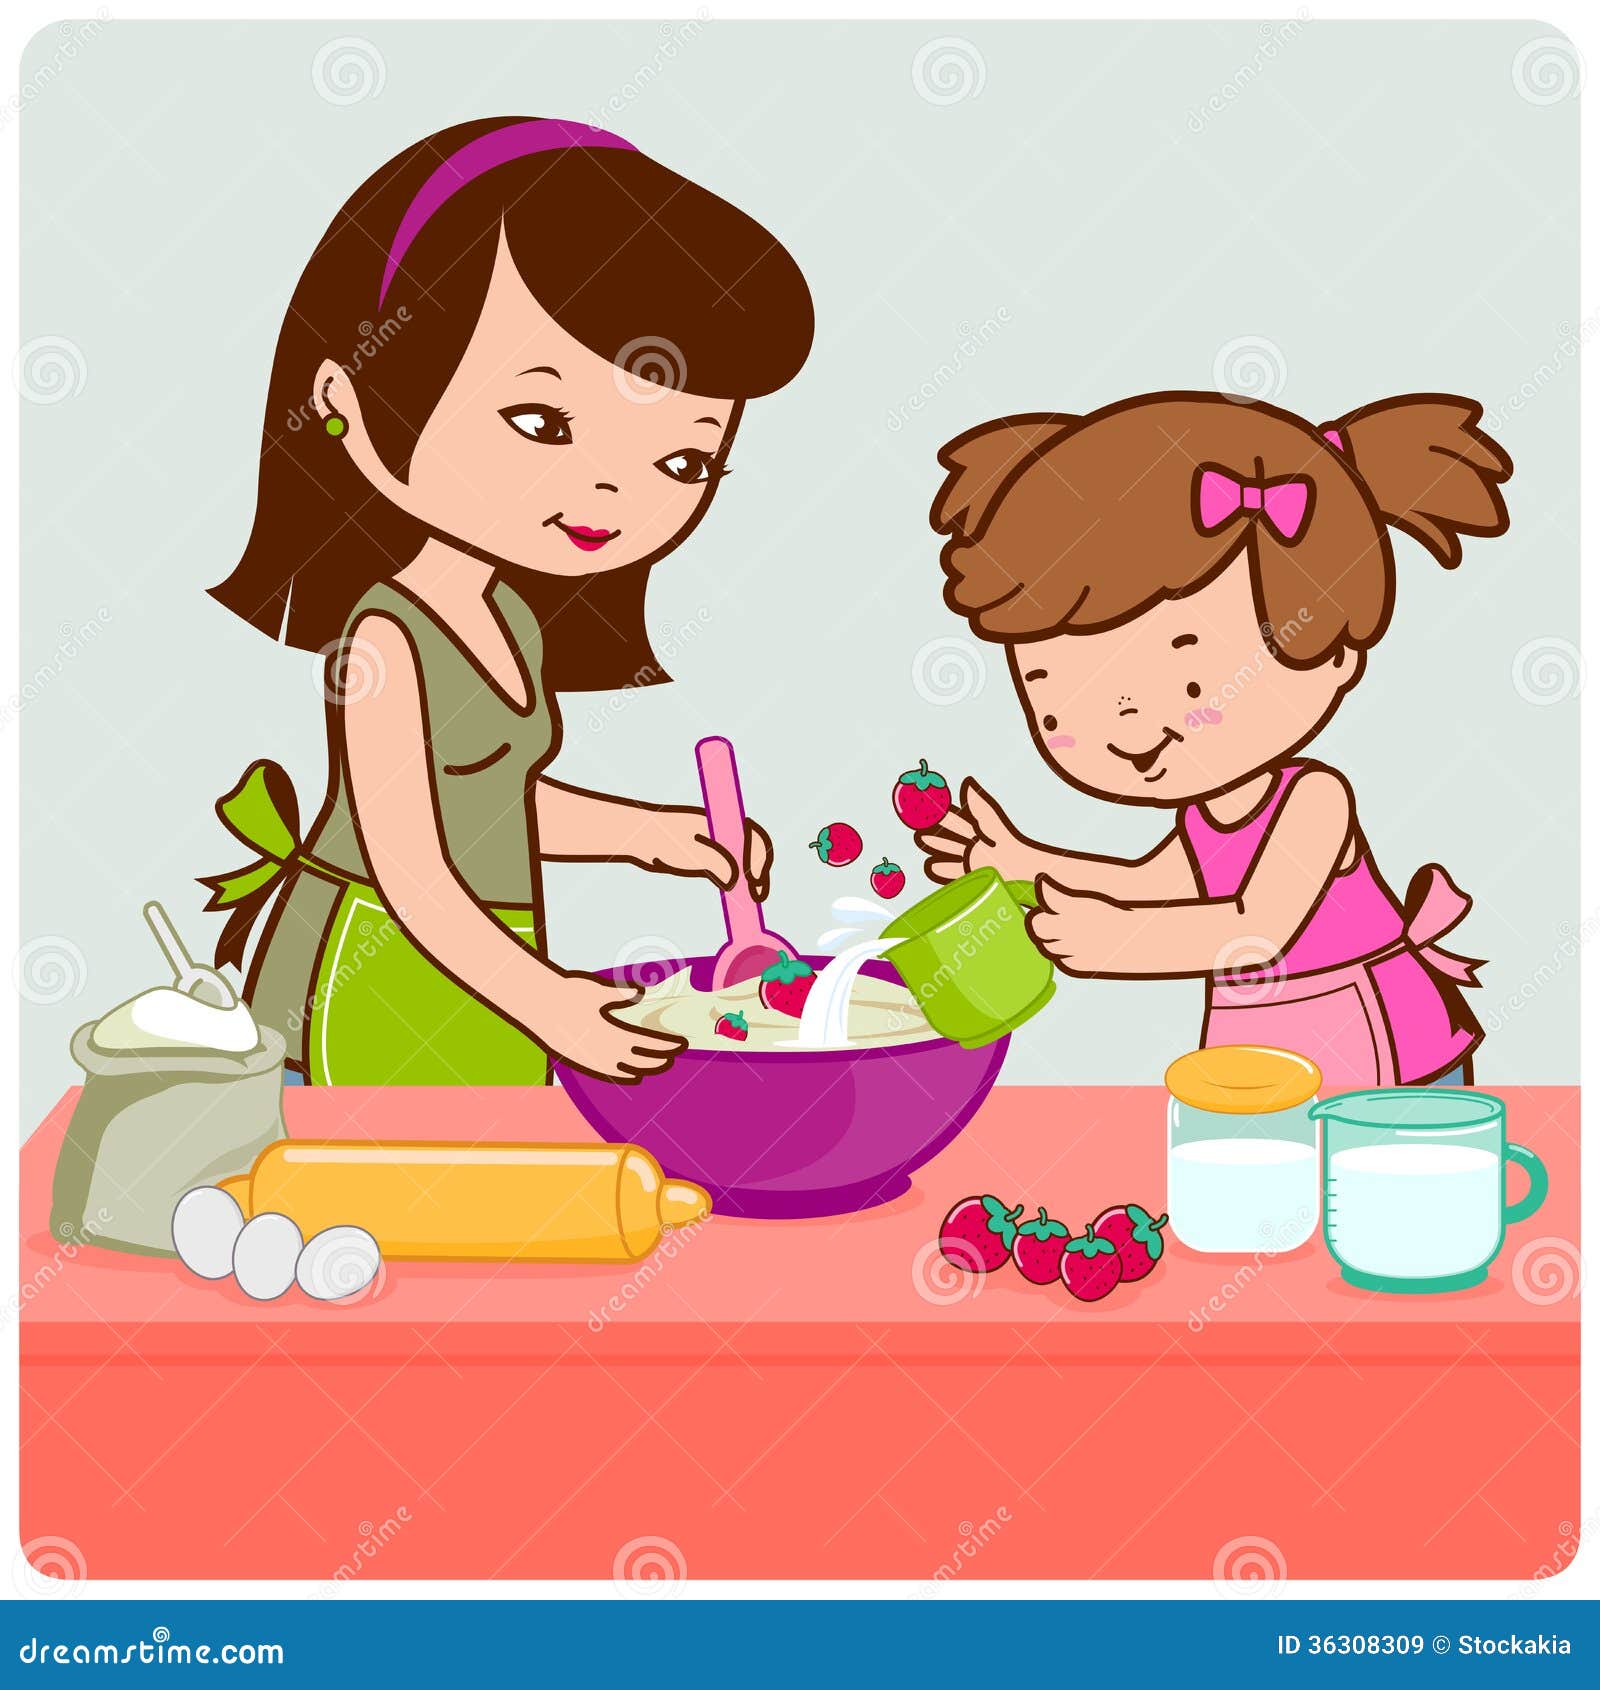 clipart mom cooking - photo #24